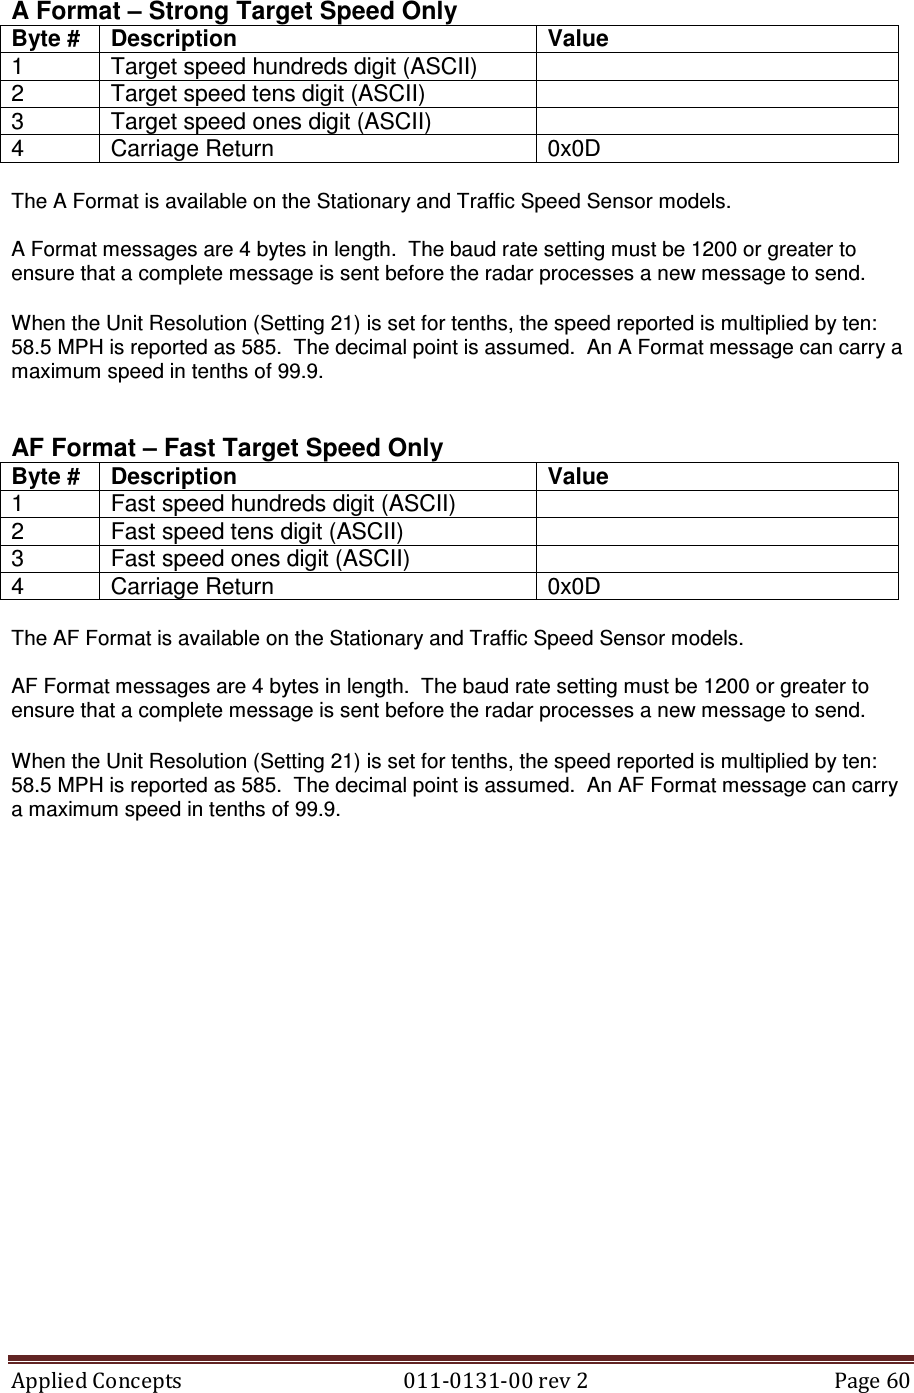 Applied Concepts                                            011-0131-00 rev 2  Page 60  A Format – Strong Target Speed Only Byte #  Description  Value 1  Target speed hundreds digit (ASCII)   2  Target speed tens digit (ASCII)   3  Target speed ones digit (ASCII)   4  Carriage Return  0x0D  The A Format is available on the Stationary and Traffic Speed Sensor models.  A Format messages are 4 bytes in length.  The baud rate setting must be 1200 or greater to ensure that a complete message is sent before the radar processes a new message to send.  When the Unit Resolution (Setting 21) is set for tenths, the speed reported is multiplied by ten: 58.5 MPH is reported as 585.  The decimal point is assumed.  An A Format message can carry a maximum speed in tenths of 99.9.   AF Format – Fast Target Speed Only Byte #  Description  Value 1  Fast speed hundreds digit (ASCII)   2  Fast speed tens digit (ASCII)   3  Fast speed ones digit (ASCII)   4  Carriage Return  0x0D  The AF Format is available on the Stationary and Traffic Speed Sensor models.  AF Format messages are 4 bytes in length.  The baud rate setting must be 1200 or greater to ensure that a complete message is sent before the radar processes a new message to send.  When the Unit Resolution (Setting 21) is set for tenths, the speed reported is multiplied by ten: 58.5 MPH is reported as 585.  The decimal point is assumed.  An AF Format message can carry a maximum speed in tenths of 99.9.  